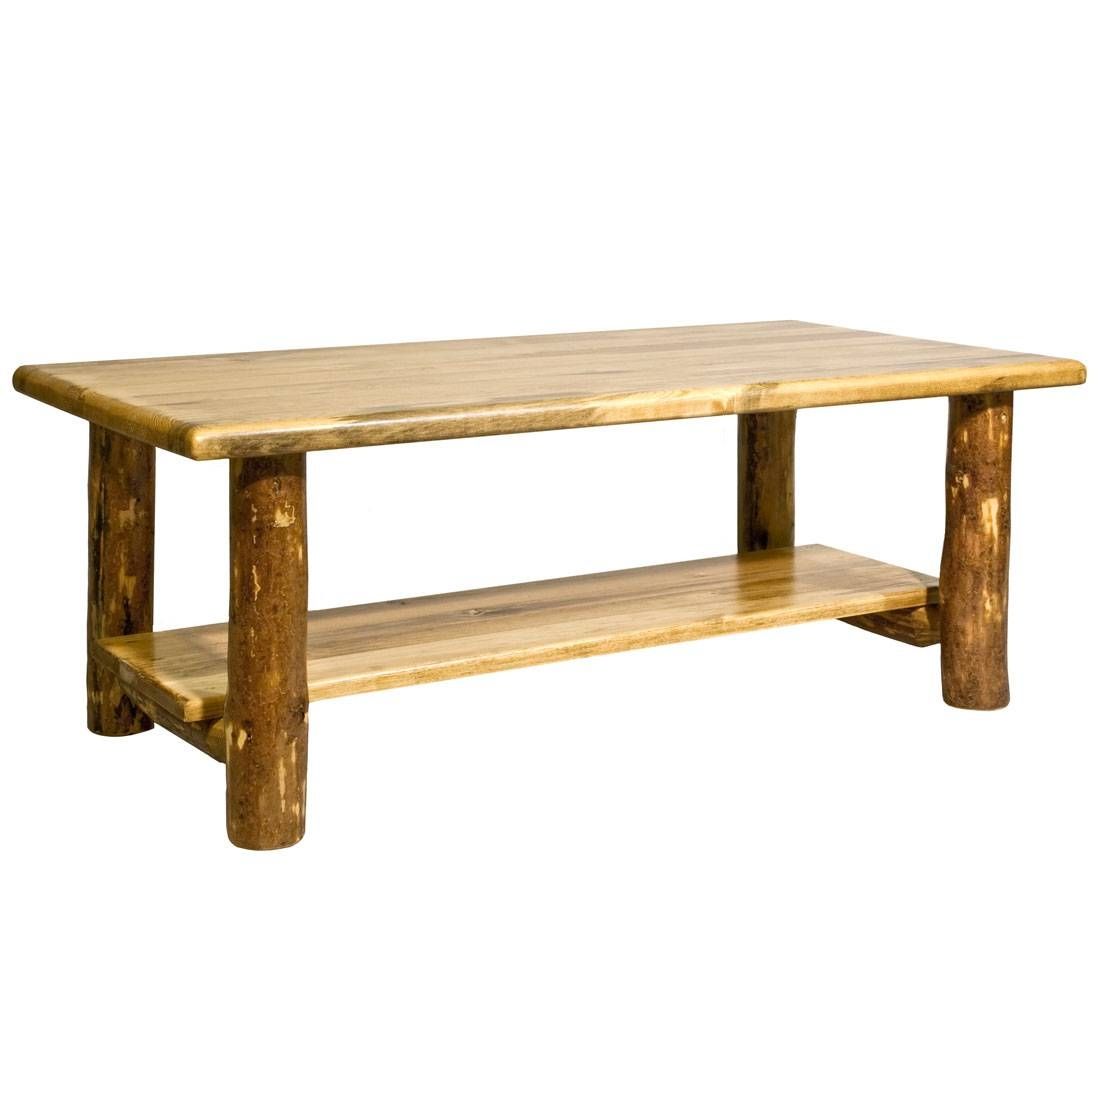 Amish Log Tables – Rustic Log Furnitureamish Meadows For Country Coffee Tables (View 30 of 30)